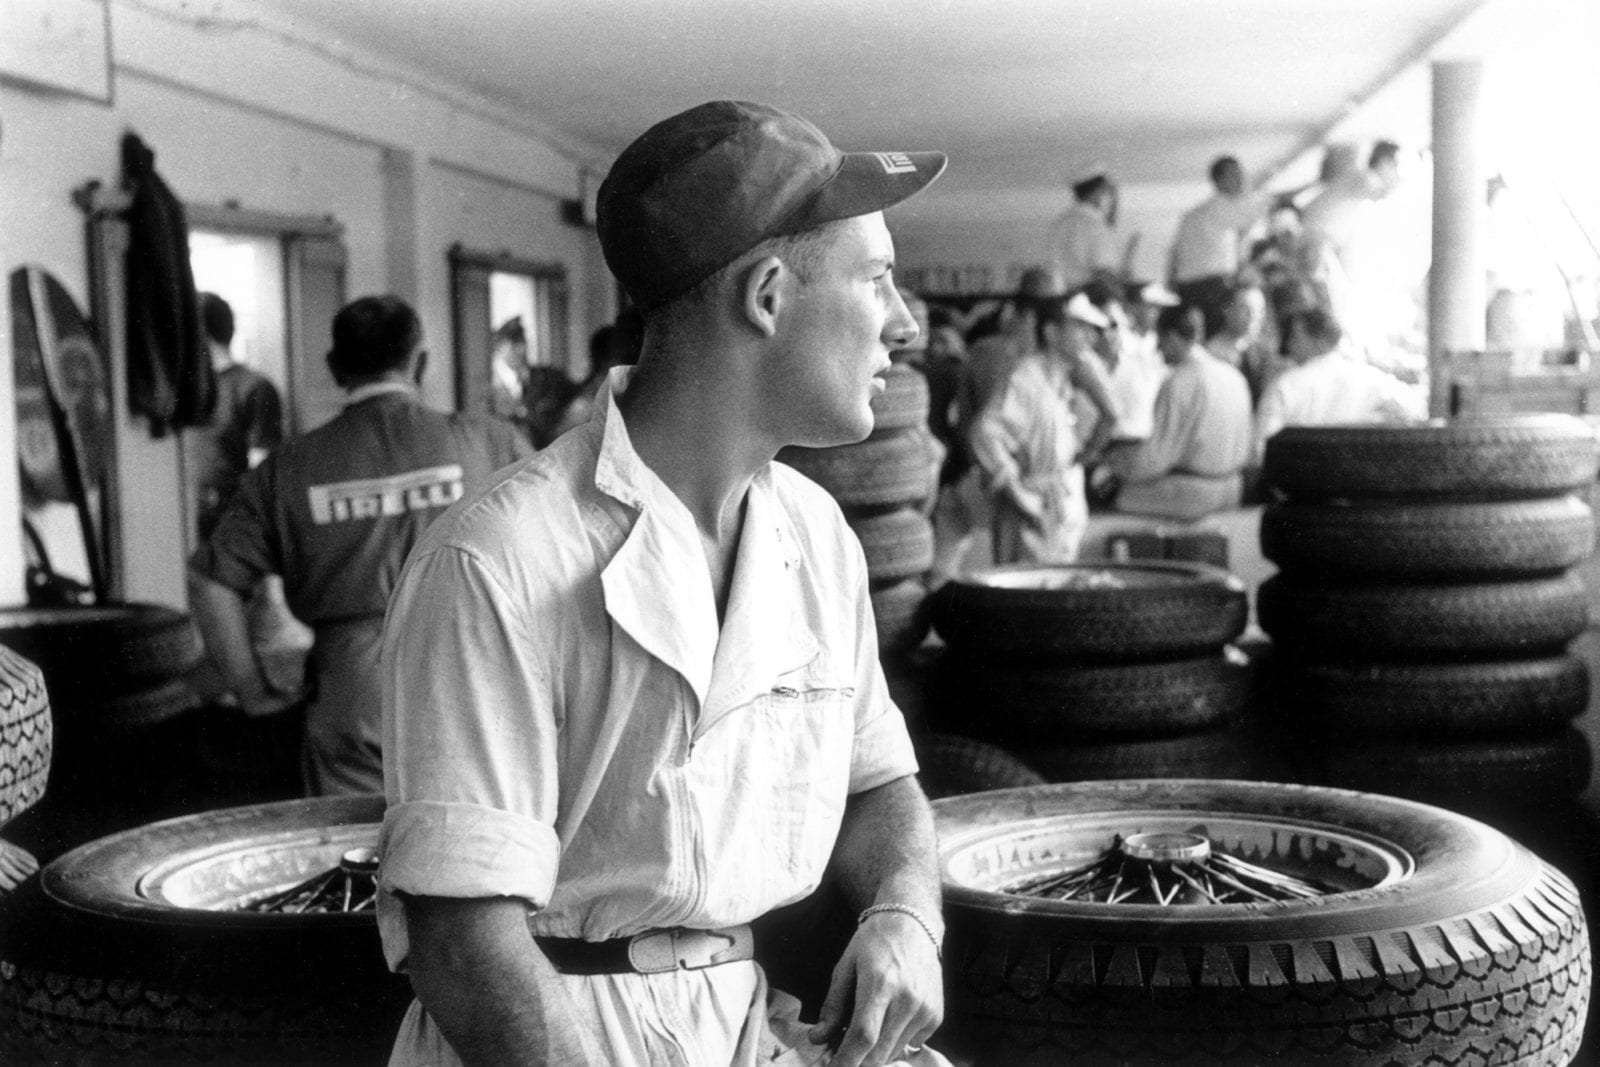 Stirling Moss surrounded by tyres in the pits at the 1954 Italian Grand Prix